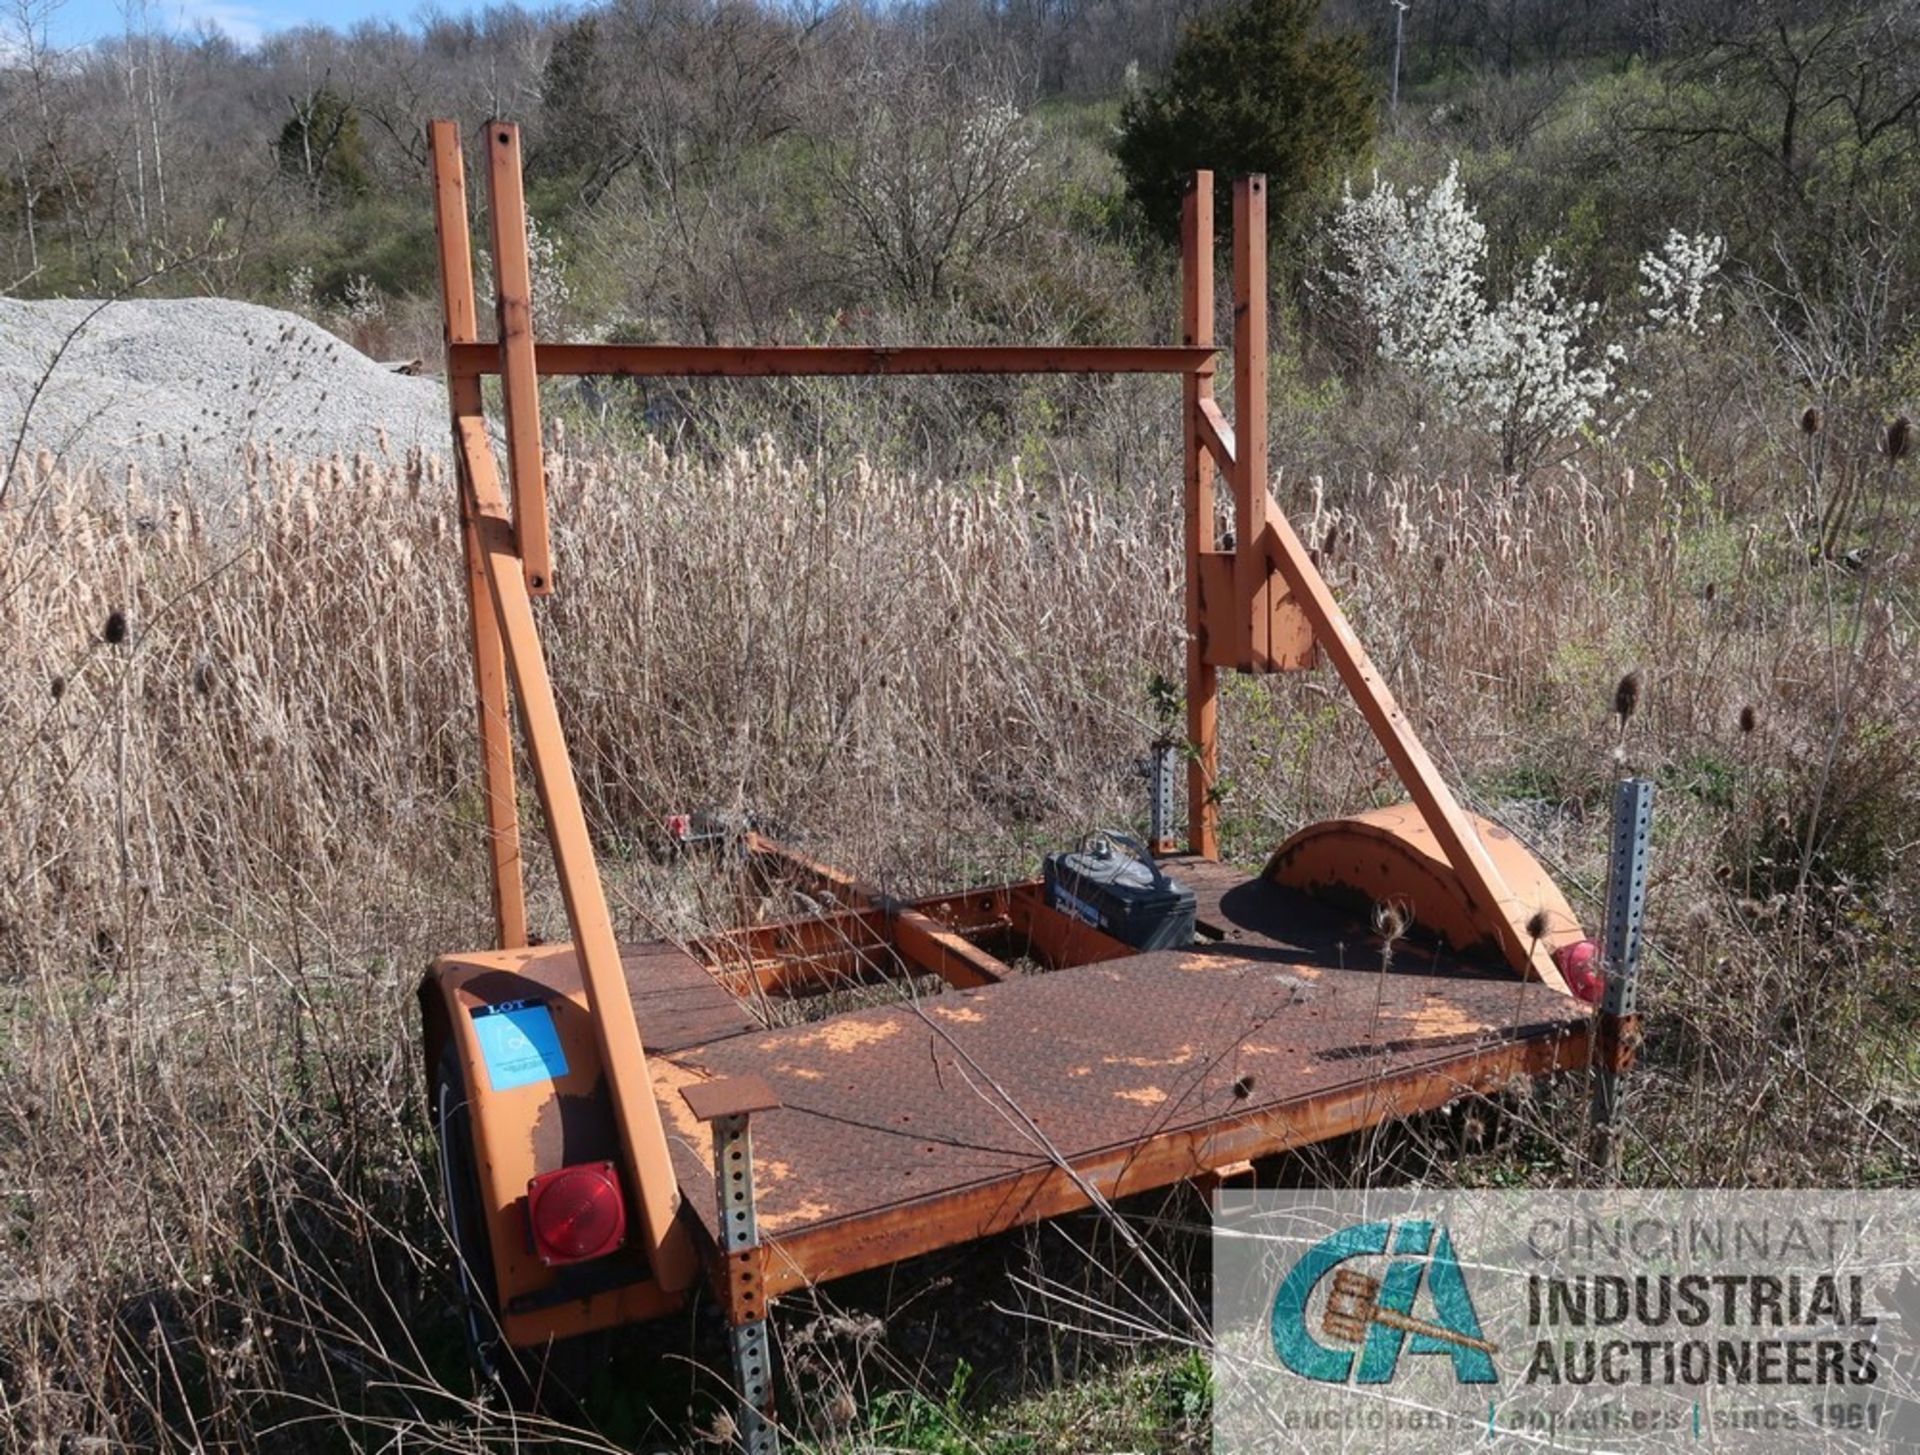 (LOT) 36" BUCKET WITH CRAWLER TRACK, TRAFCON DIRECTION ARROW AND TRAILER AND PALLET RACK - Image 4 of 8